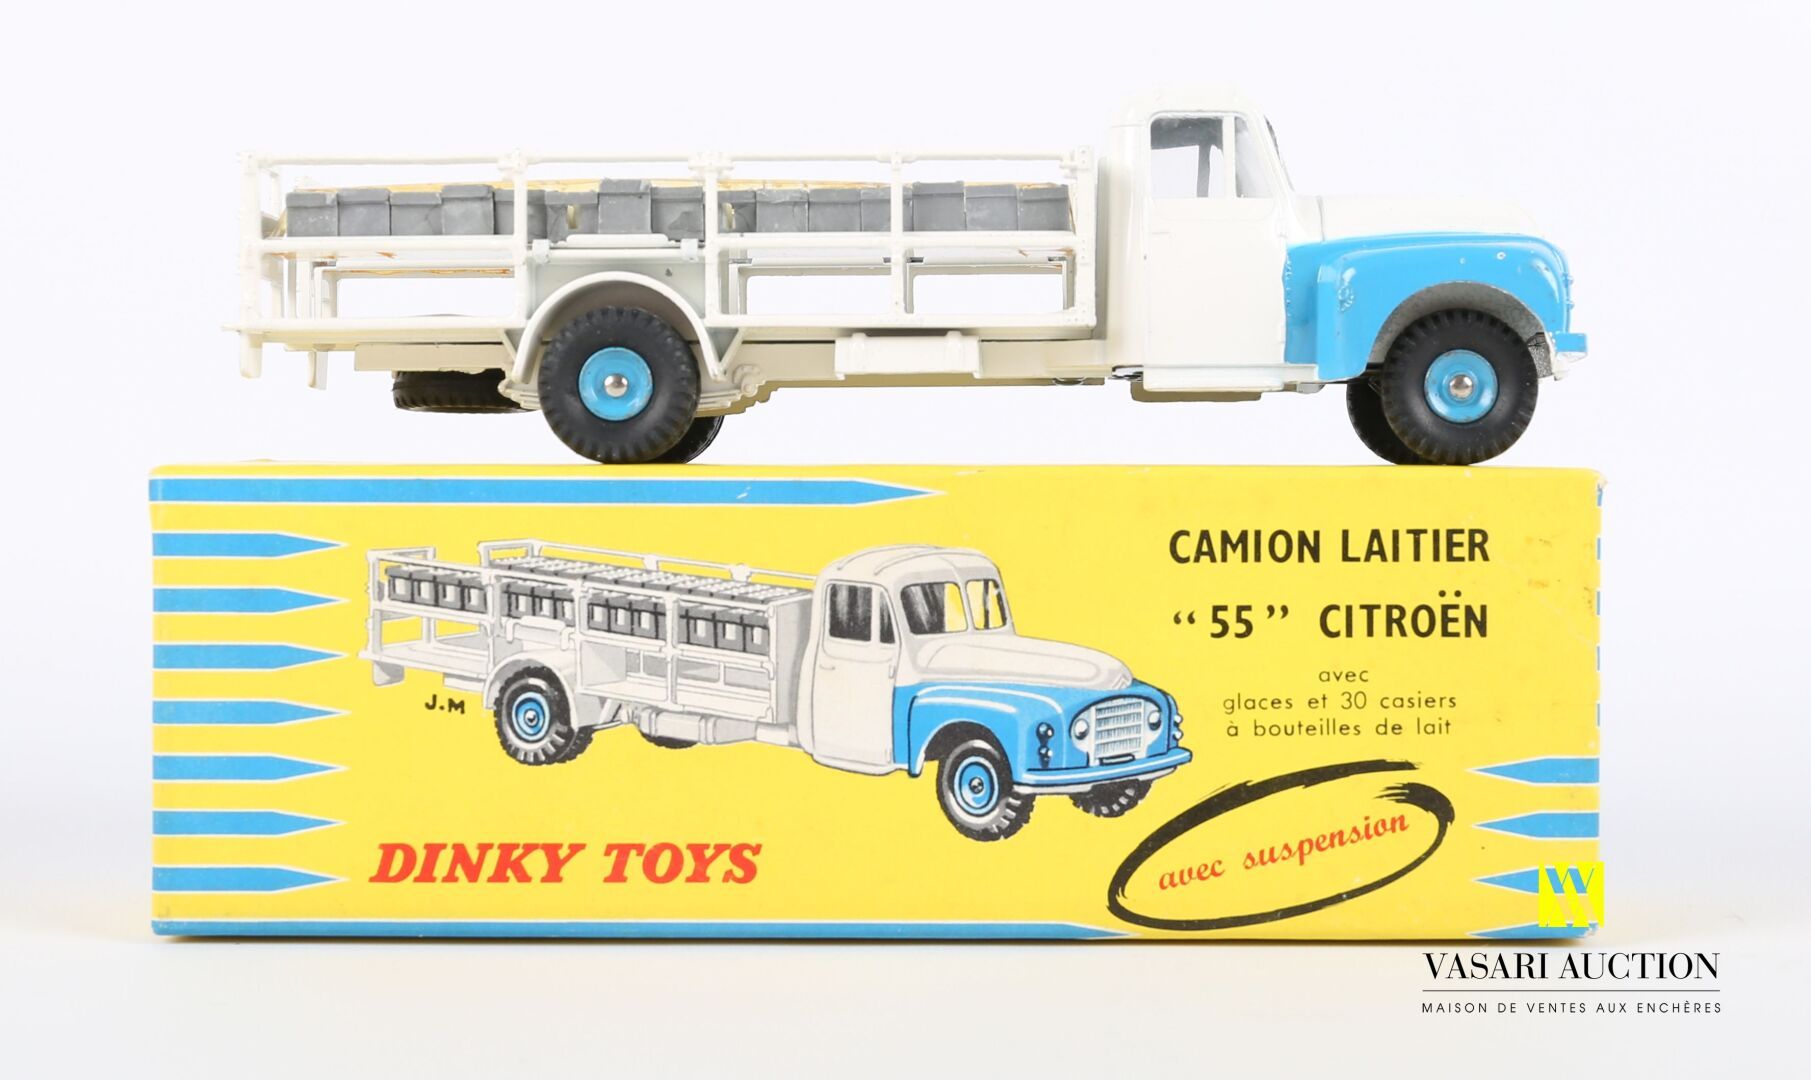 Null DINKY TOYS MECCANO TRIANG (FR)

Milk truck "55" Citroën with windows and 30&hellip;